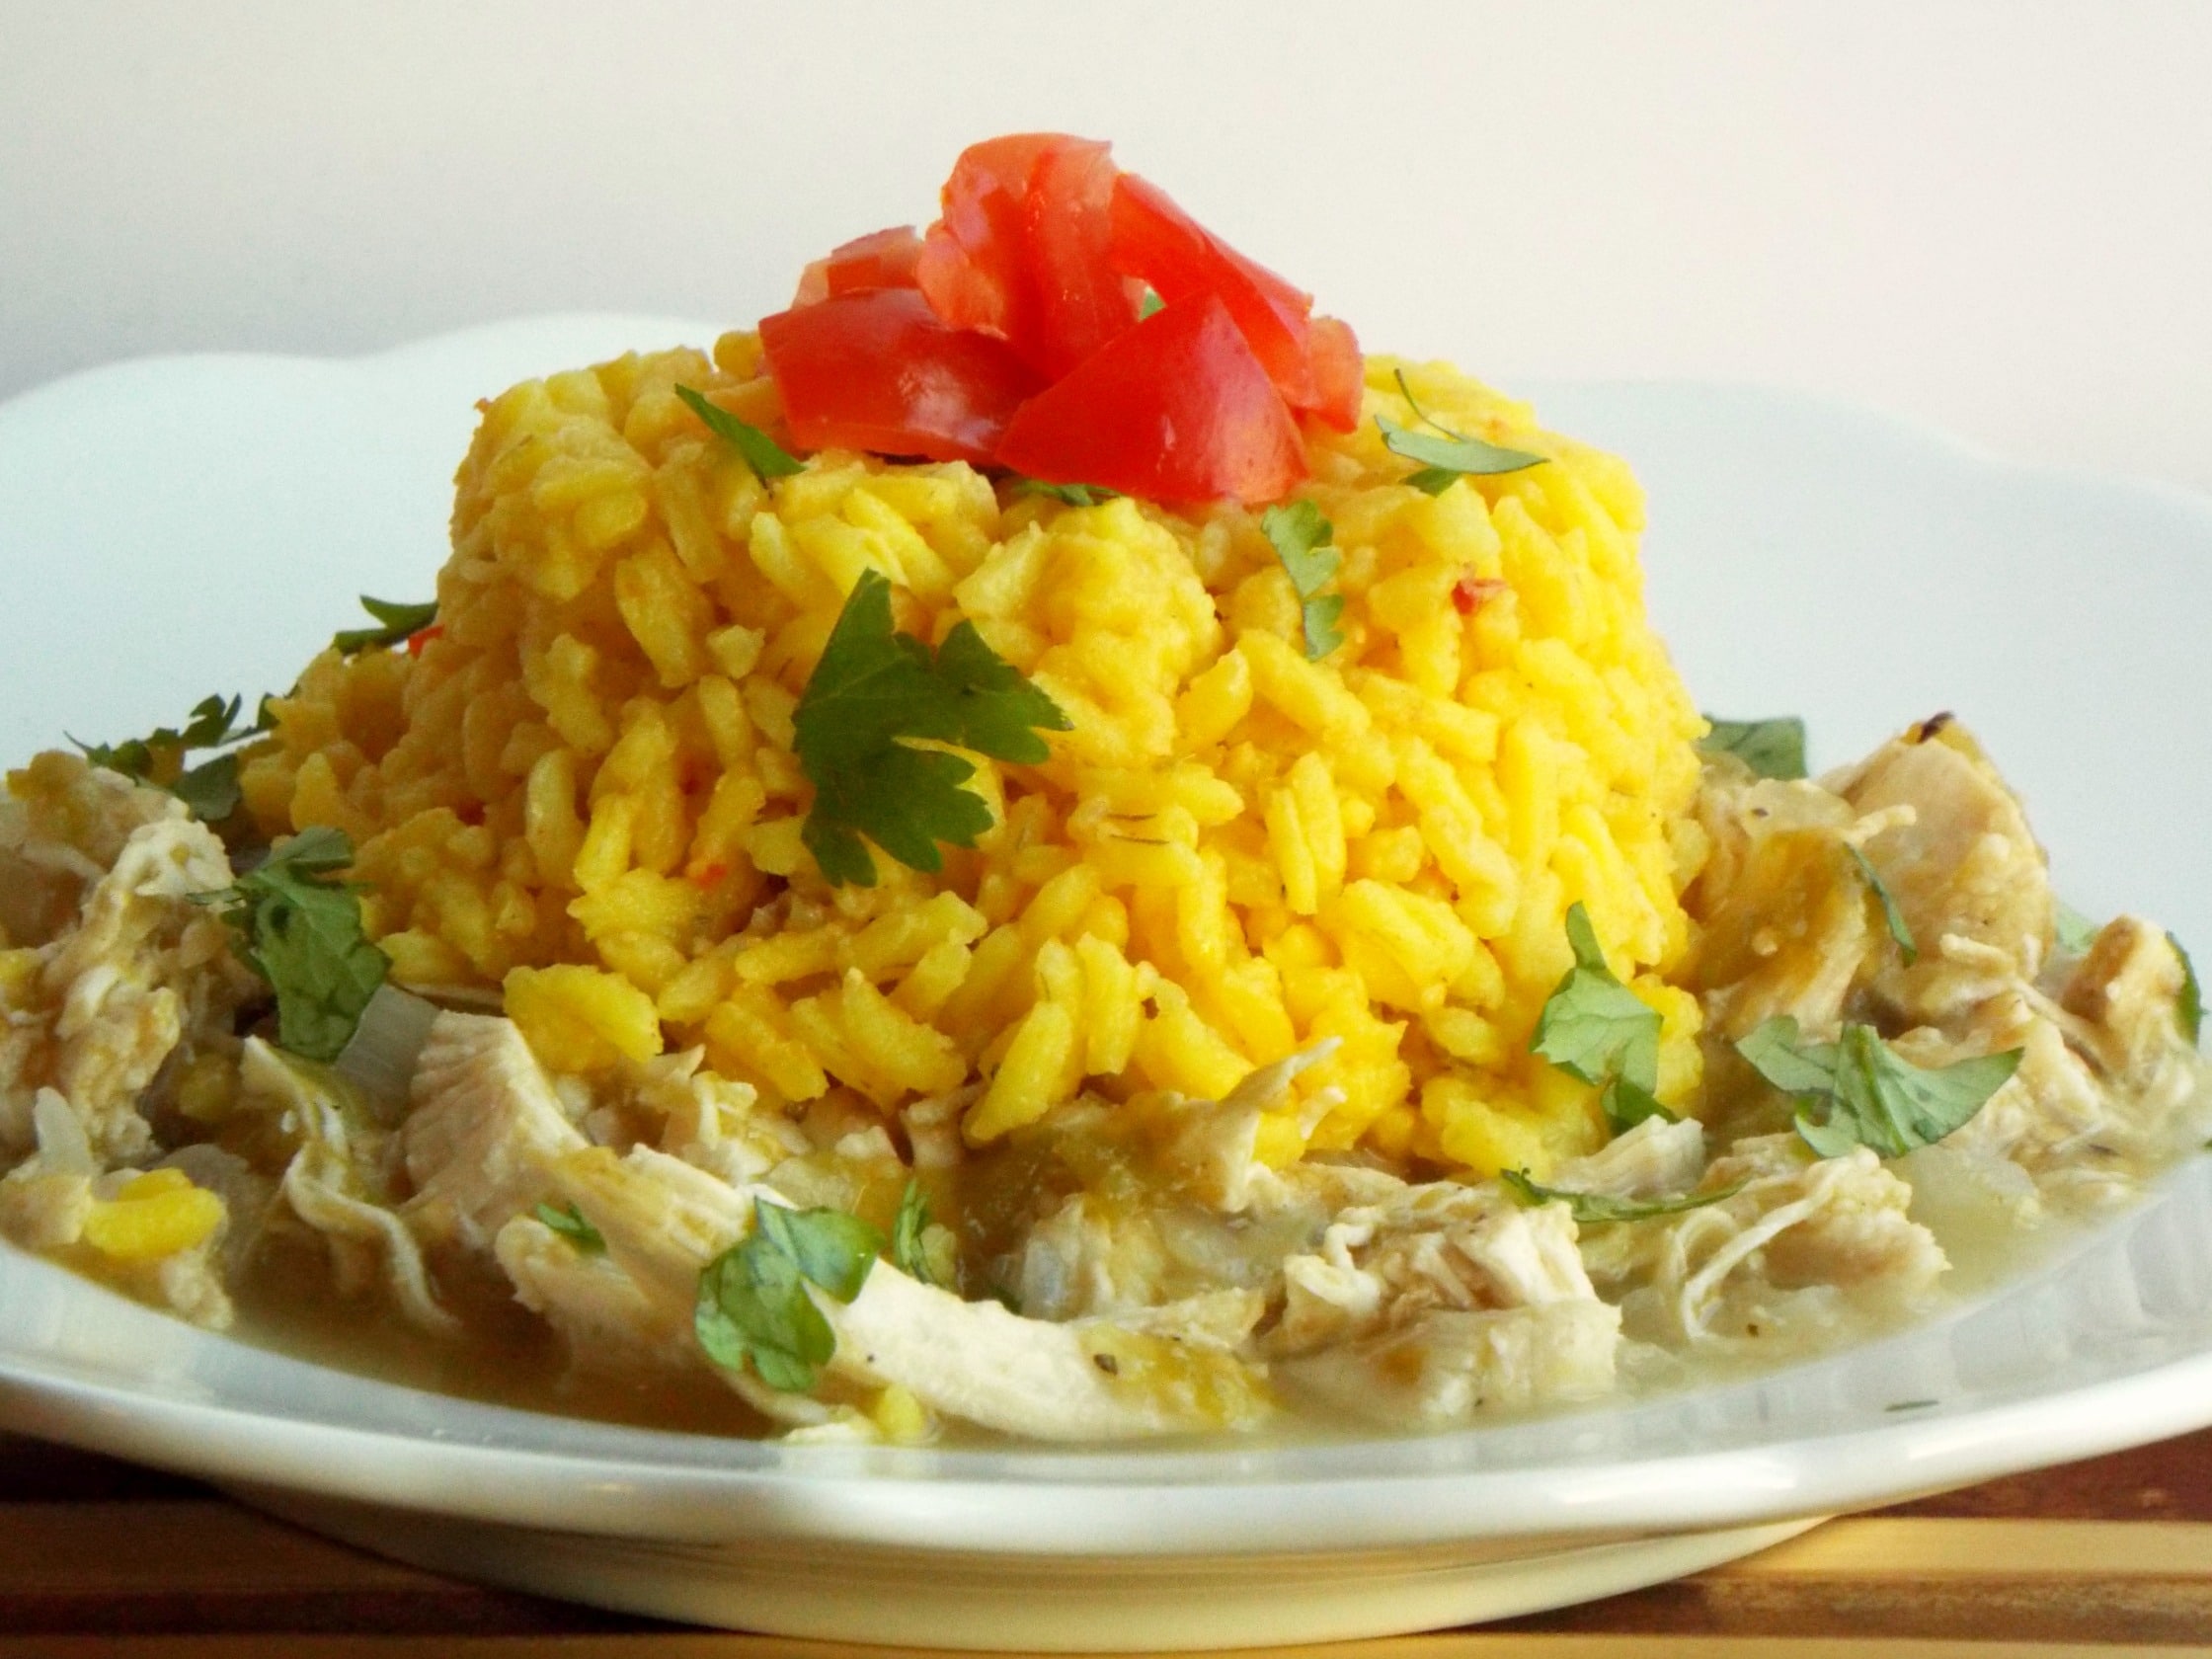 a plate of shredded chicken topped with yellow rice, tomatoes and cilantro